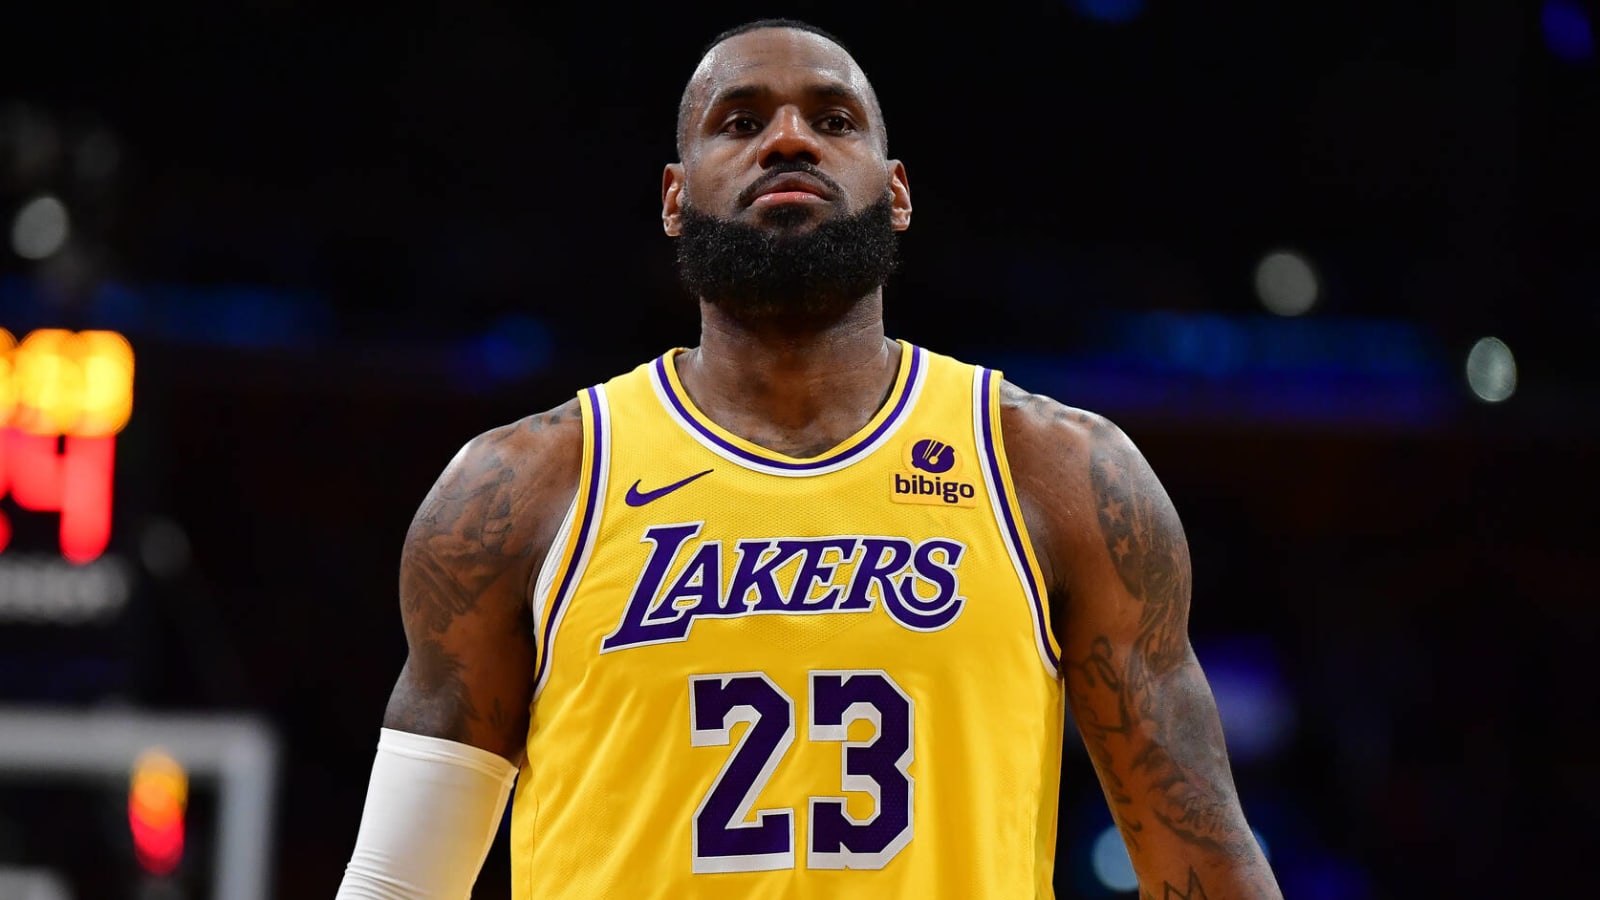  LeBron James’ Stance on Teaming With Bronny Has Changed